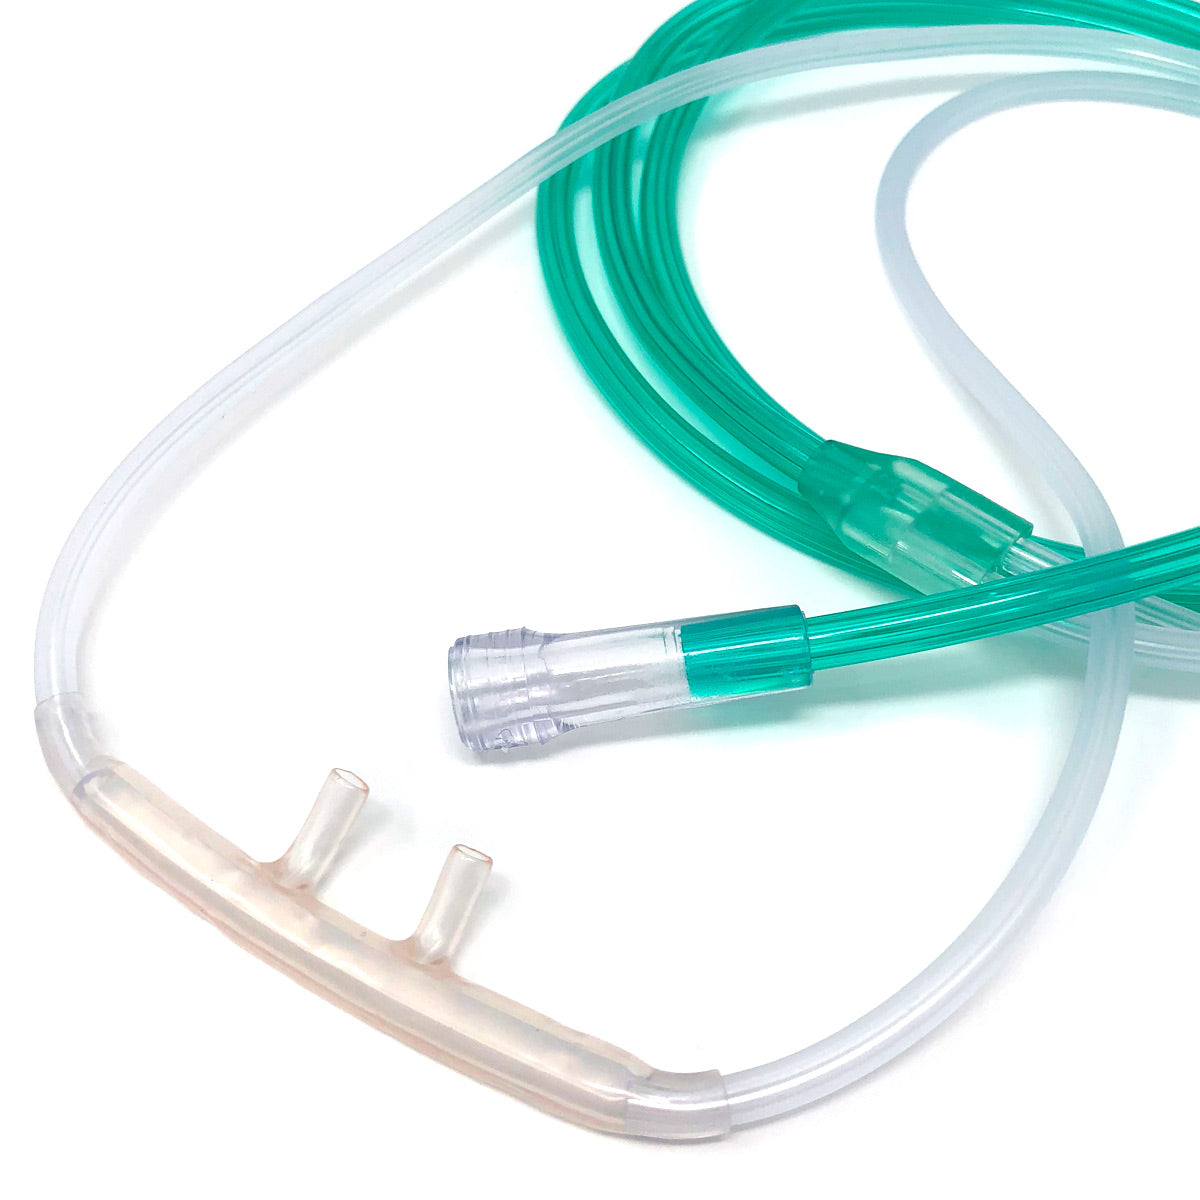 High Flow ComfortSoft Plus Nasal Cannula with 4 Foot Green Tubing - DISCONTINUED